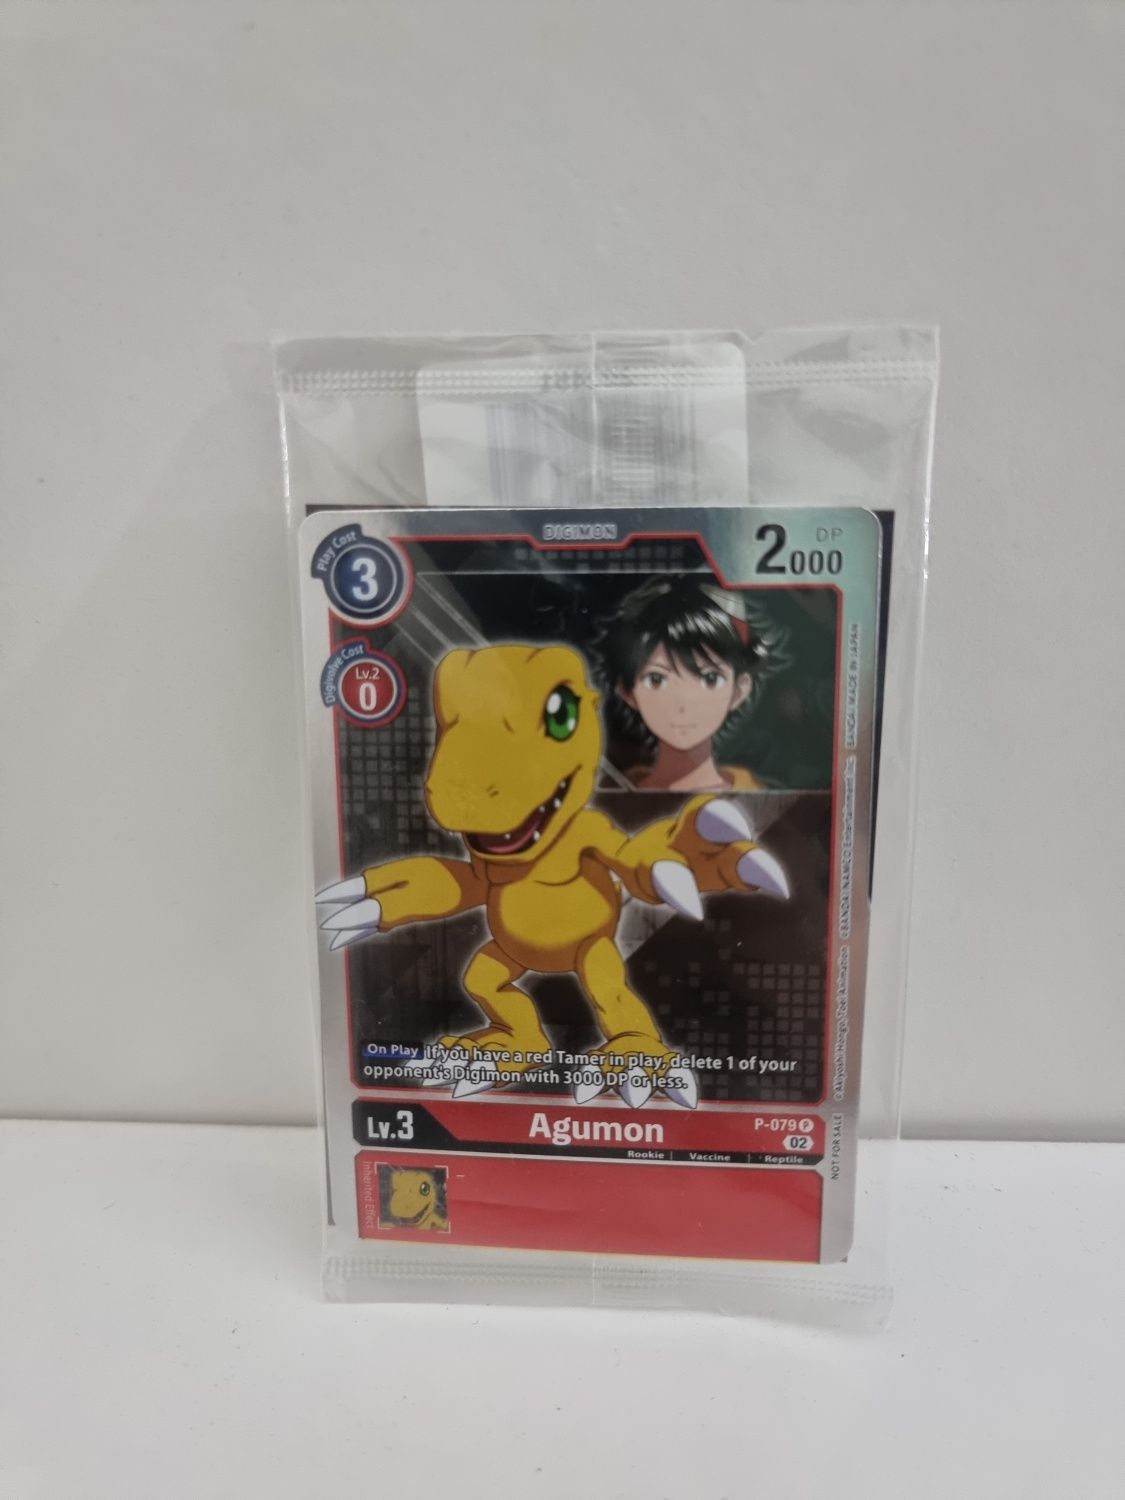 Digimon Survive TCG Cards Pack